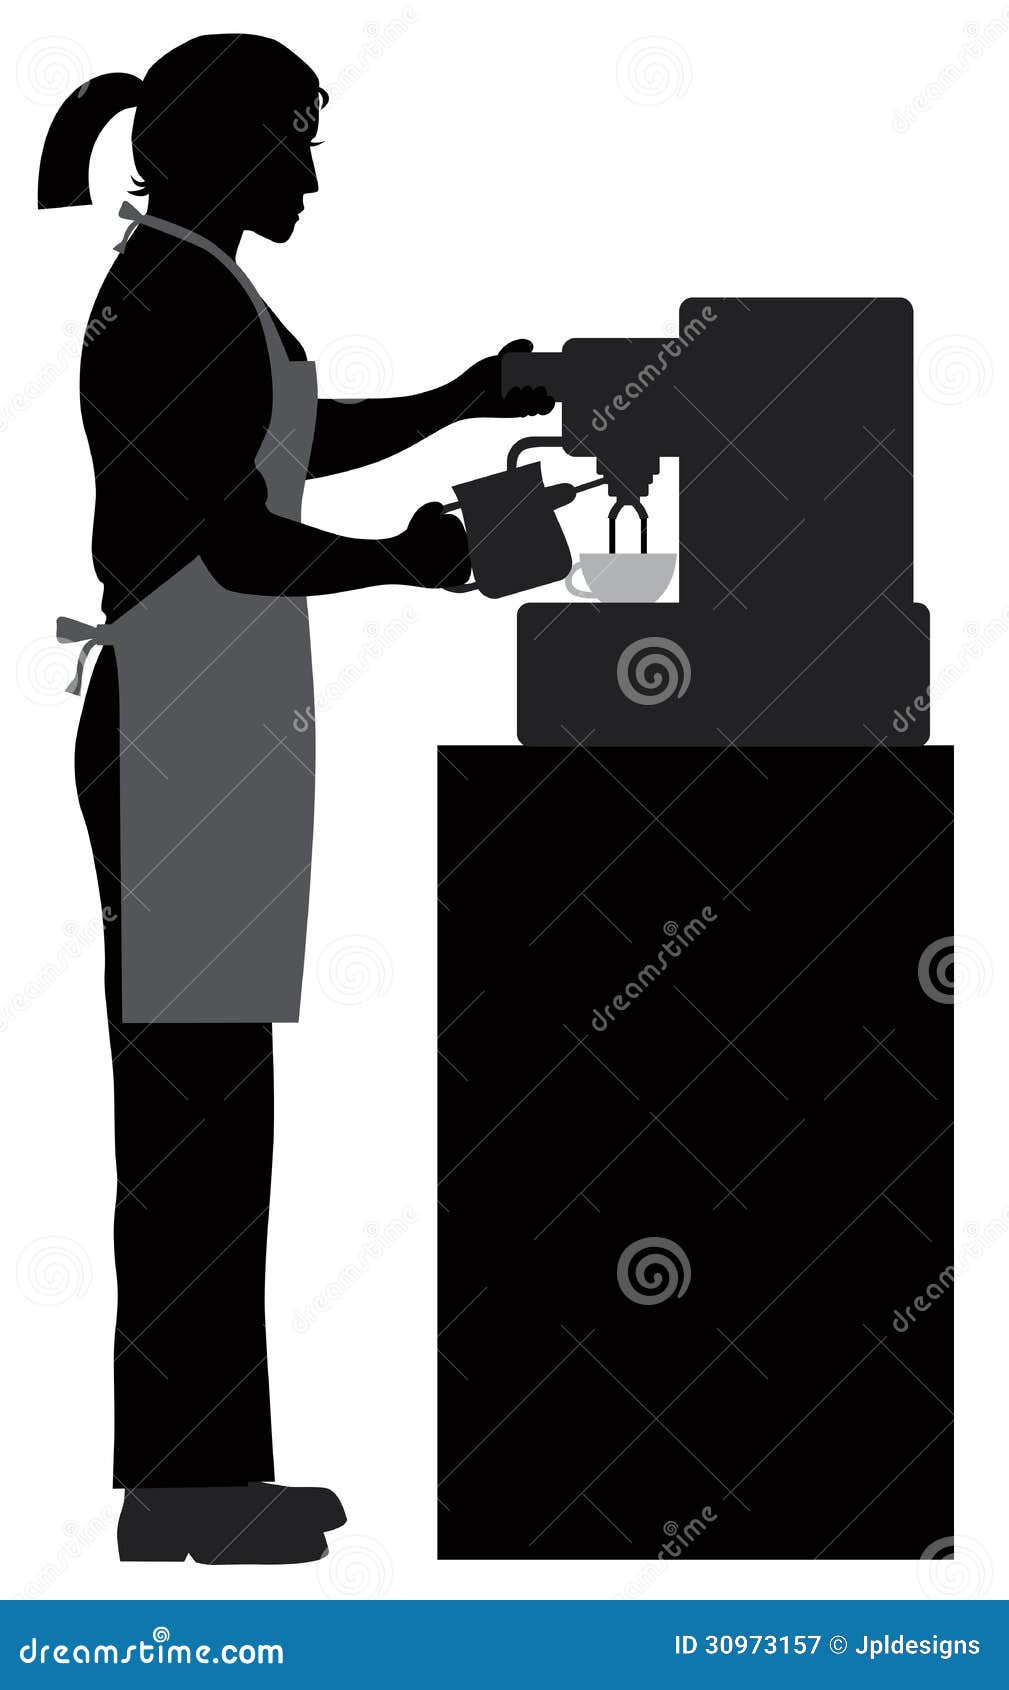 Illustration about Female Coffee Bartender Barista Silhouette Making Espres...